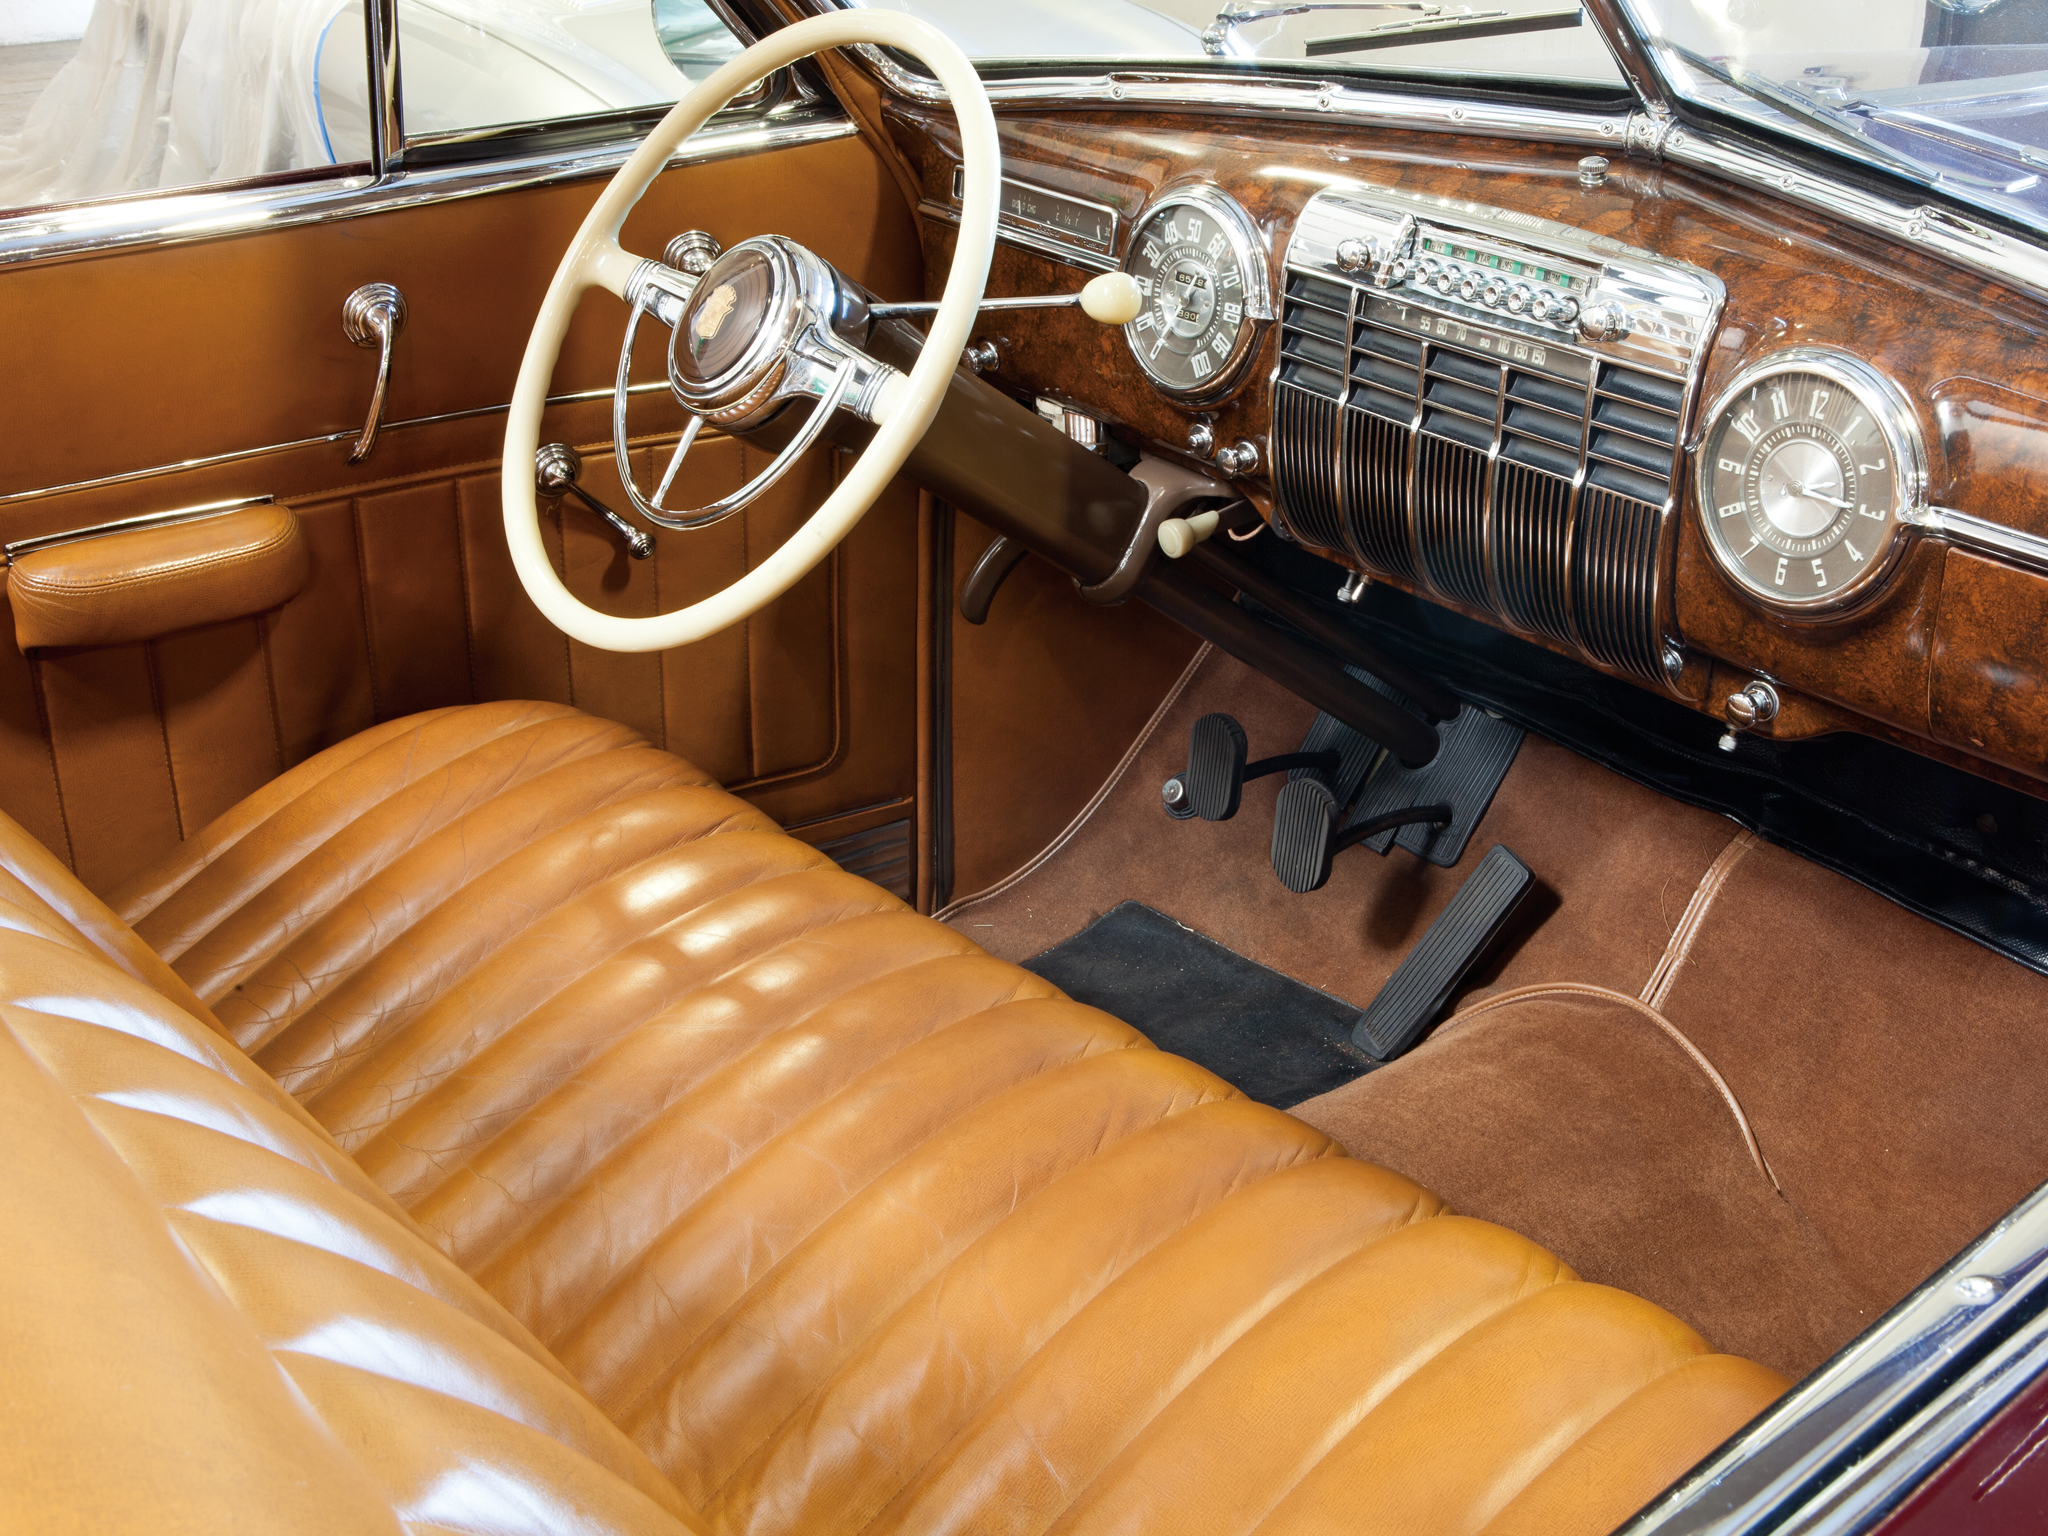 1941, Cadillac, Sixty two, Convertible, Coupe, Luxury, Retro, Interior Wallpaper